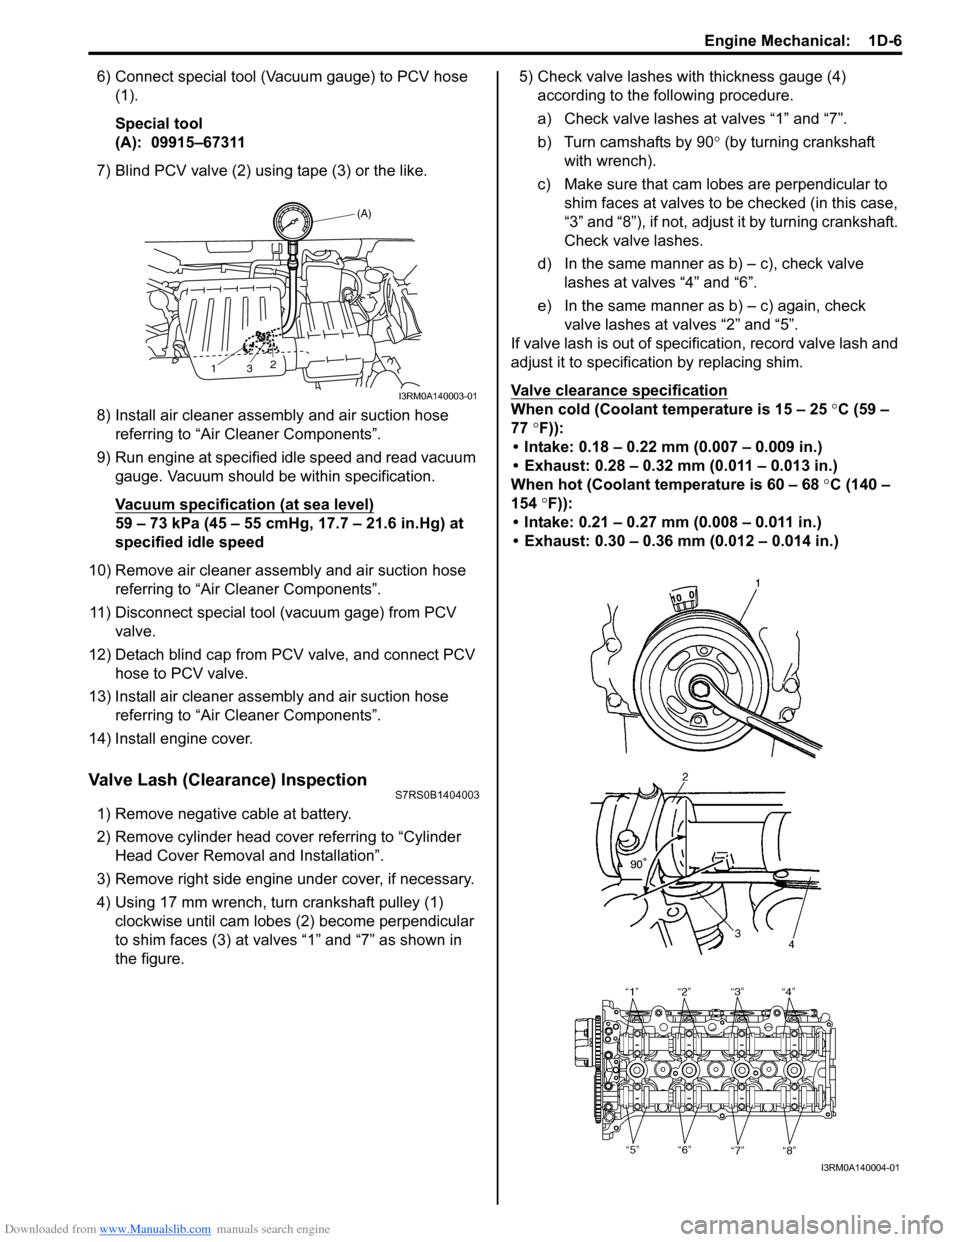 SUZUKI SWIFT 2008 2.G Service Workshop Manual Downloaded from www.Manualslib.com manuals search engine Engine Mechanical:  1D-6
6) Connect special tool (Vacuum gauge) to PCV hose (1).
Special tool
(A):  09915–67311
7) Blind PCV valve (2) using 